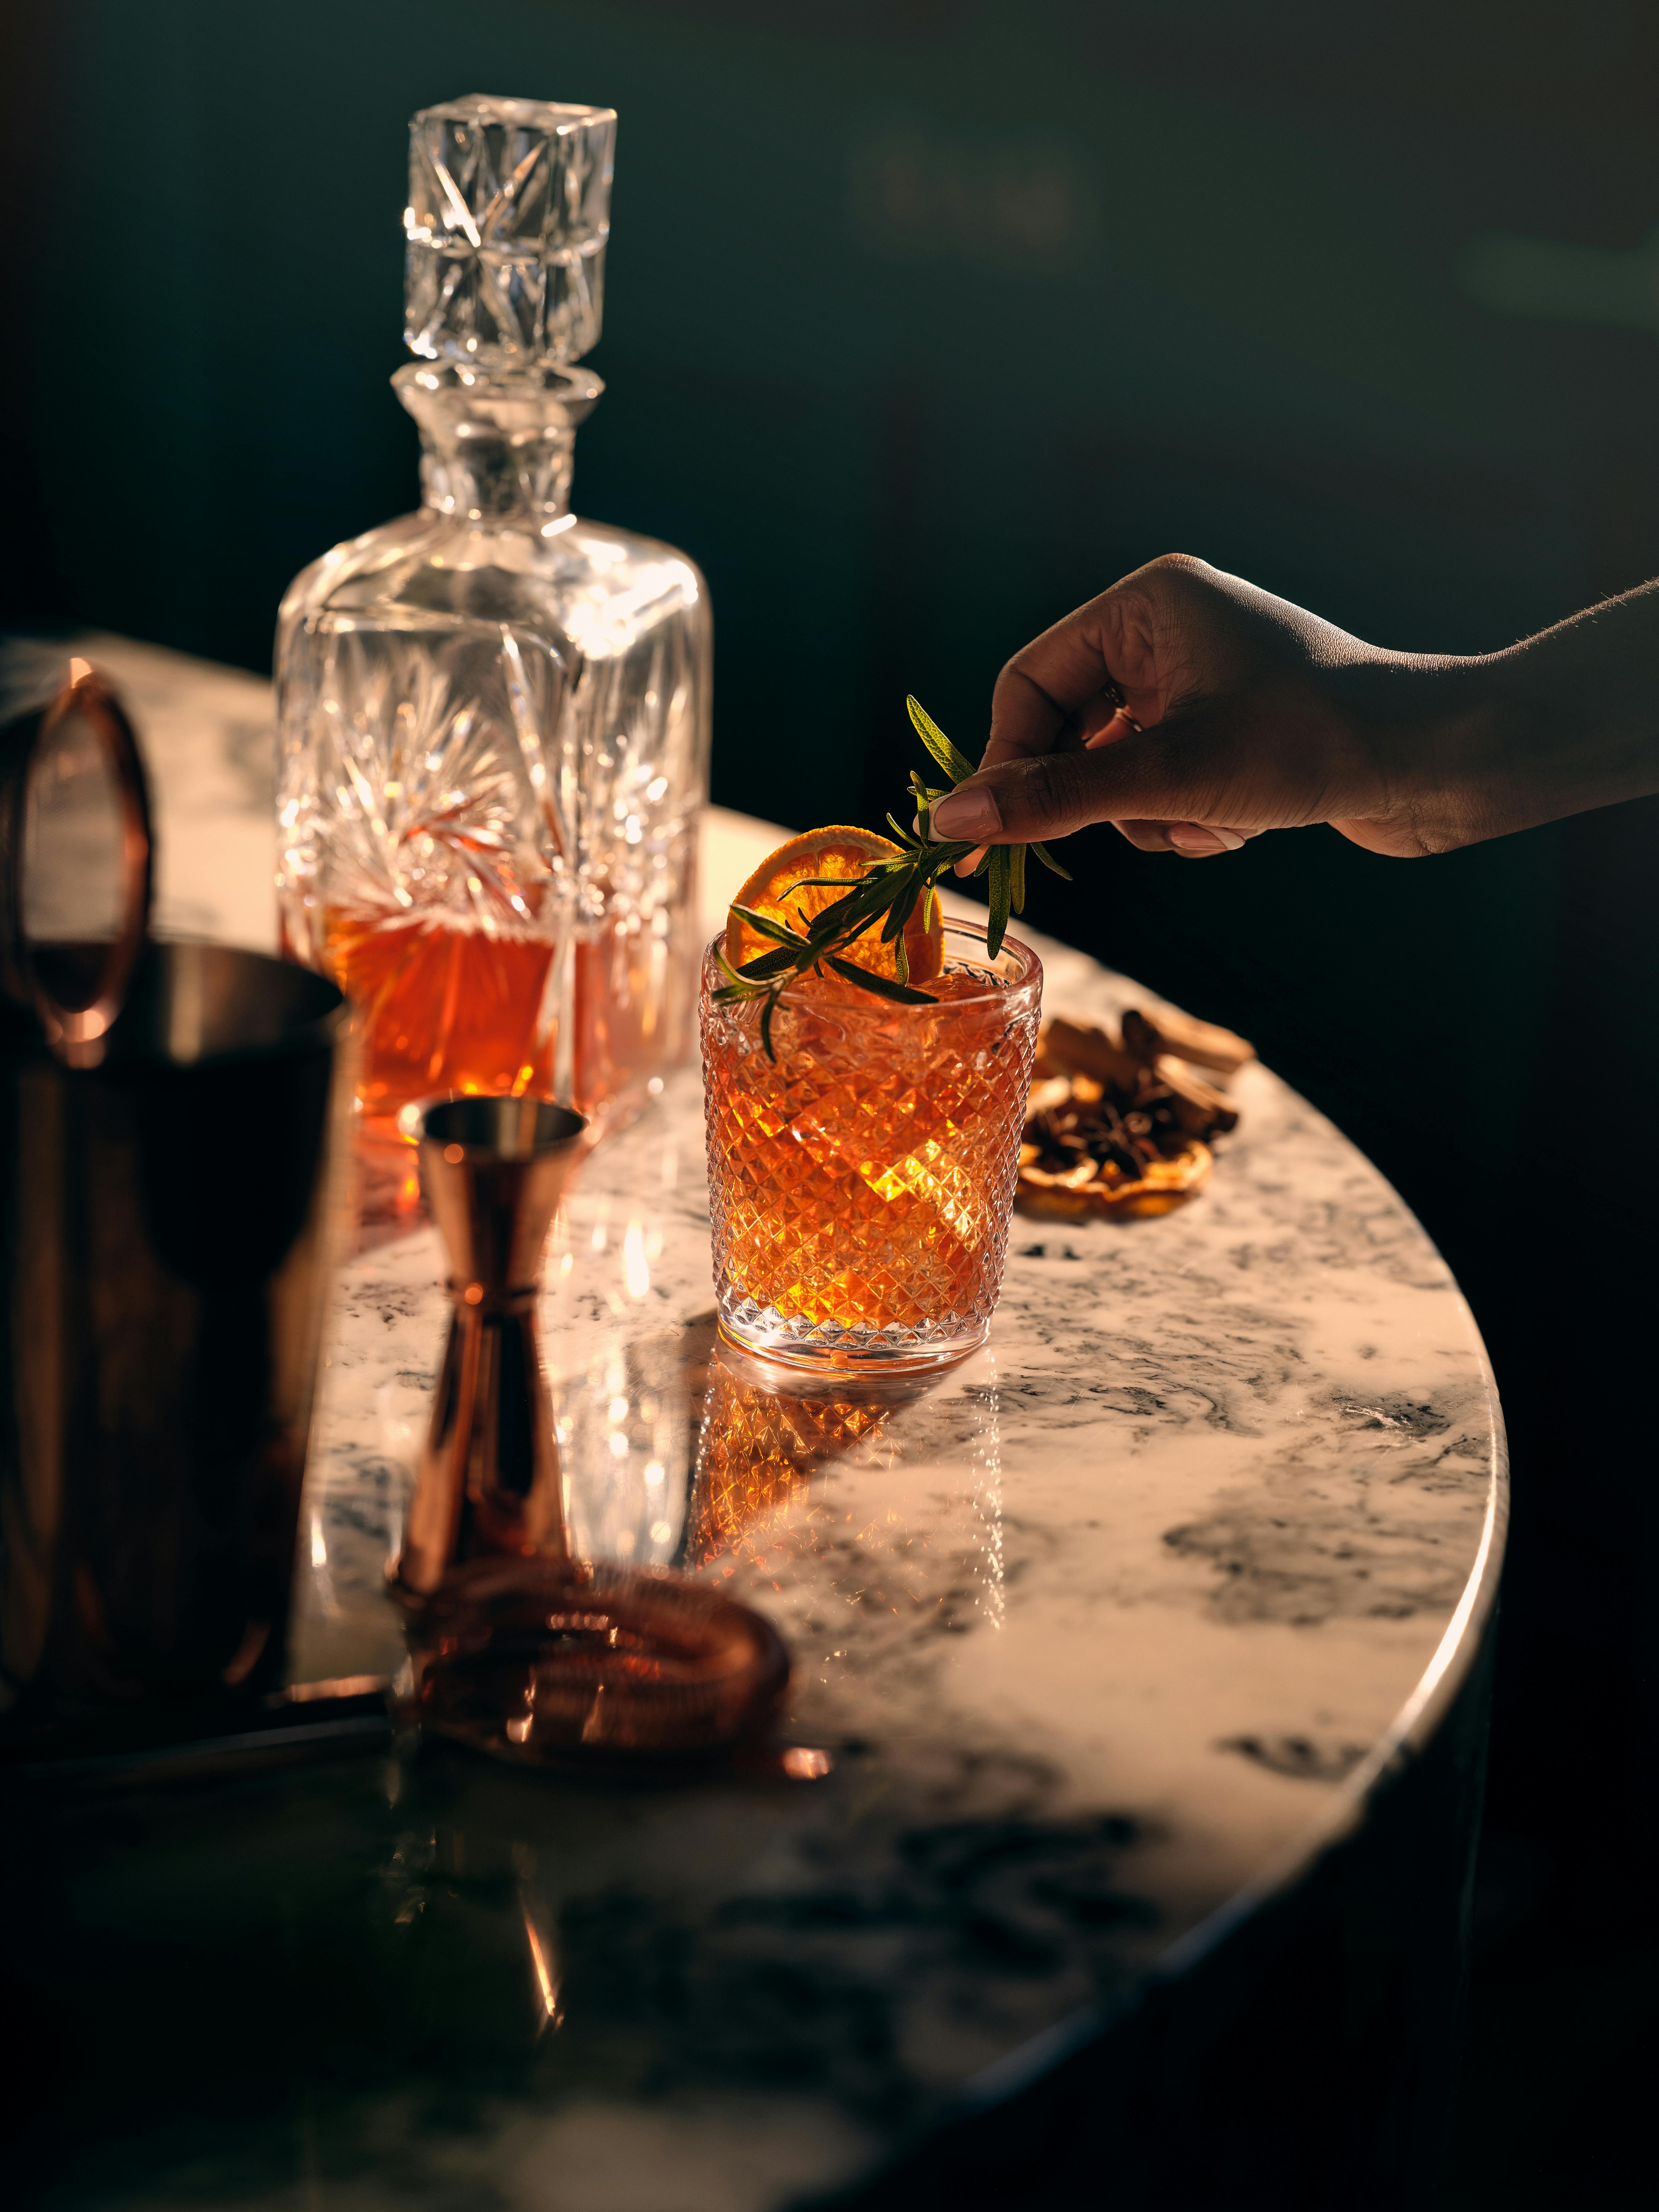 And when you are hosting such a party, you would want to serve some delicious drinks too, that pair perfectly with grilled recipes. One cocktail that is ideal for warm summer evenings is the sangria, a blend of wine, some brandy, orange liqueur and lots of cut up fruits. 